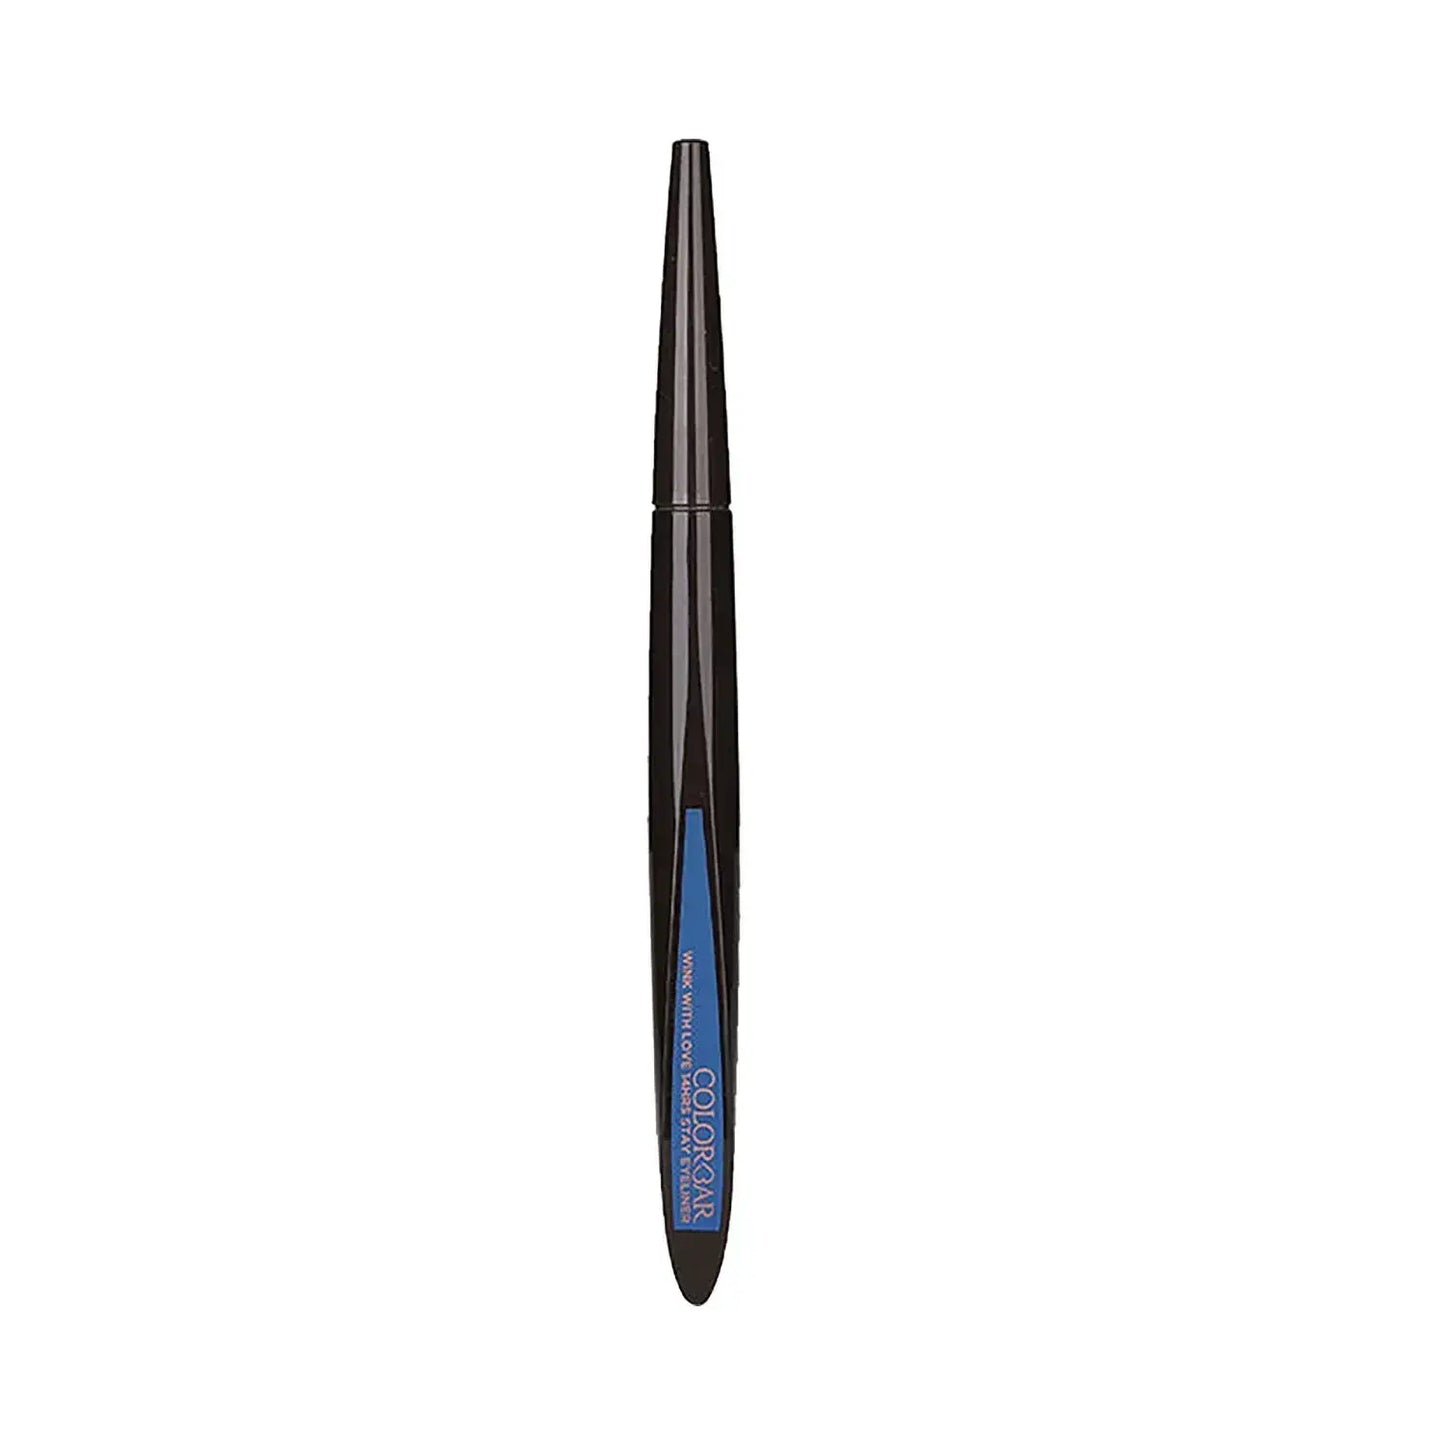 Colorbar X Jacqueline Wink With Love 14hrs Stay Eyeliner - Blue Pleasure-002 (1ml)